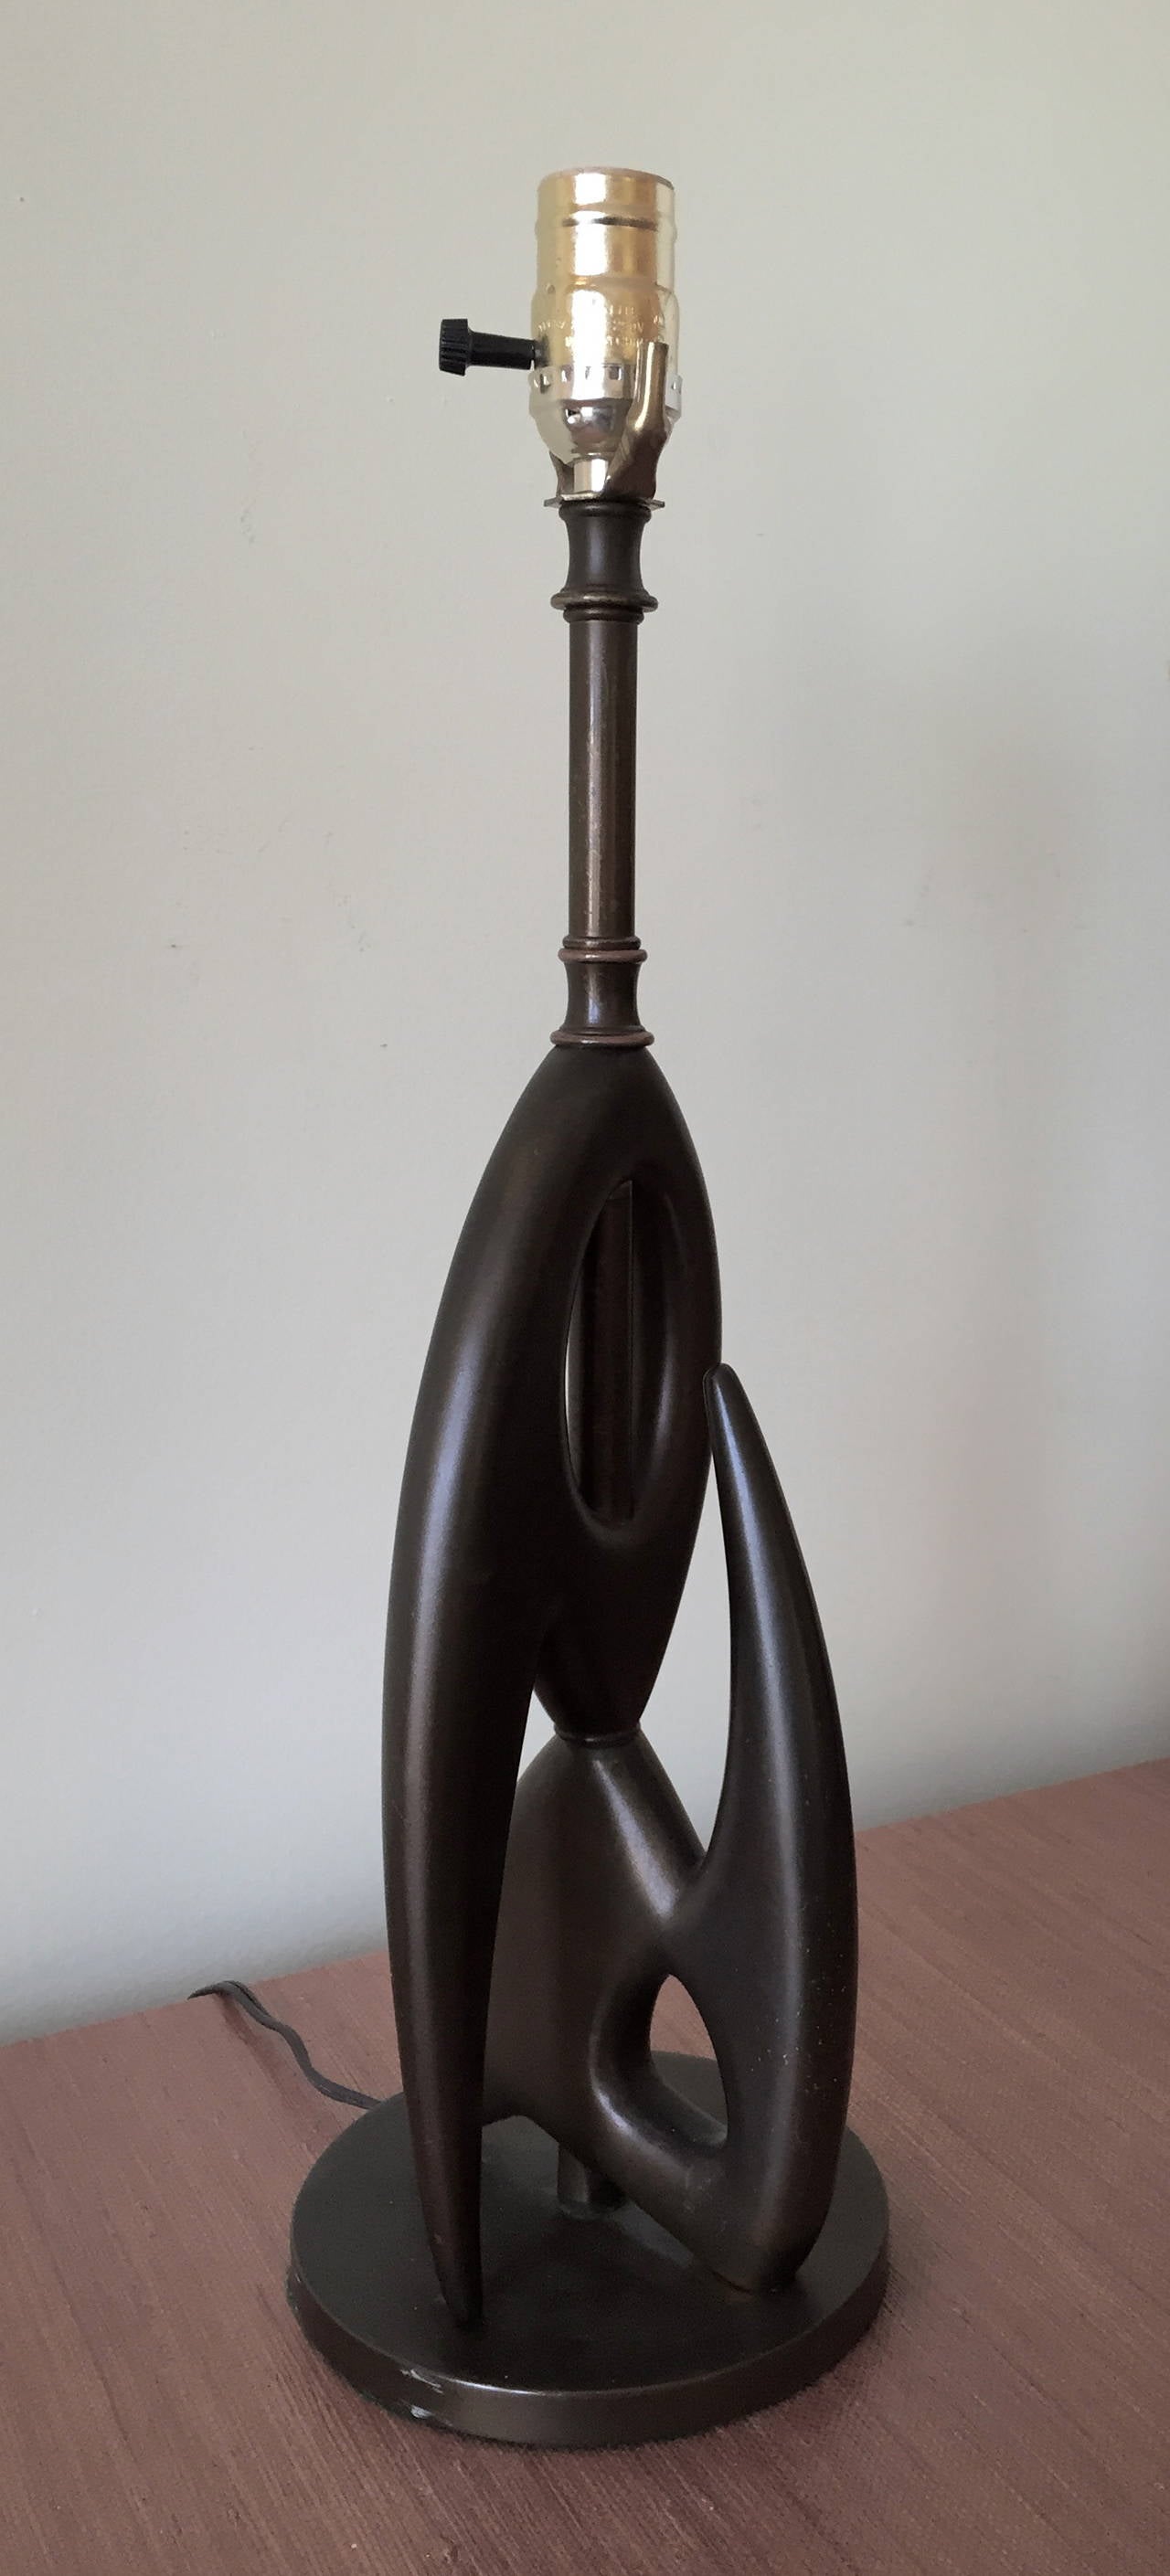 Pair of Biomorphic Sculptural Table Lamps by Rembrandt In Excellent Condition For Sale In Quogue, NY